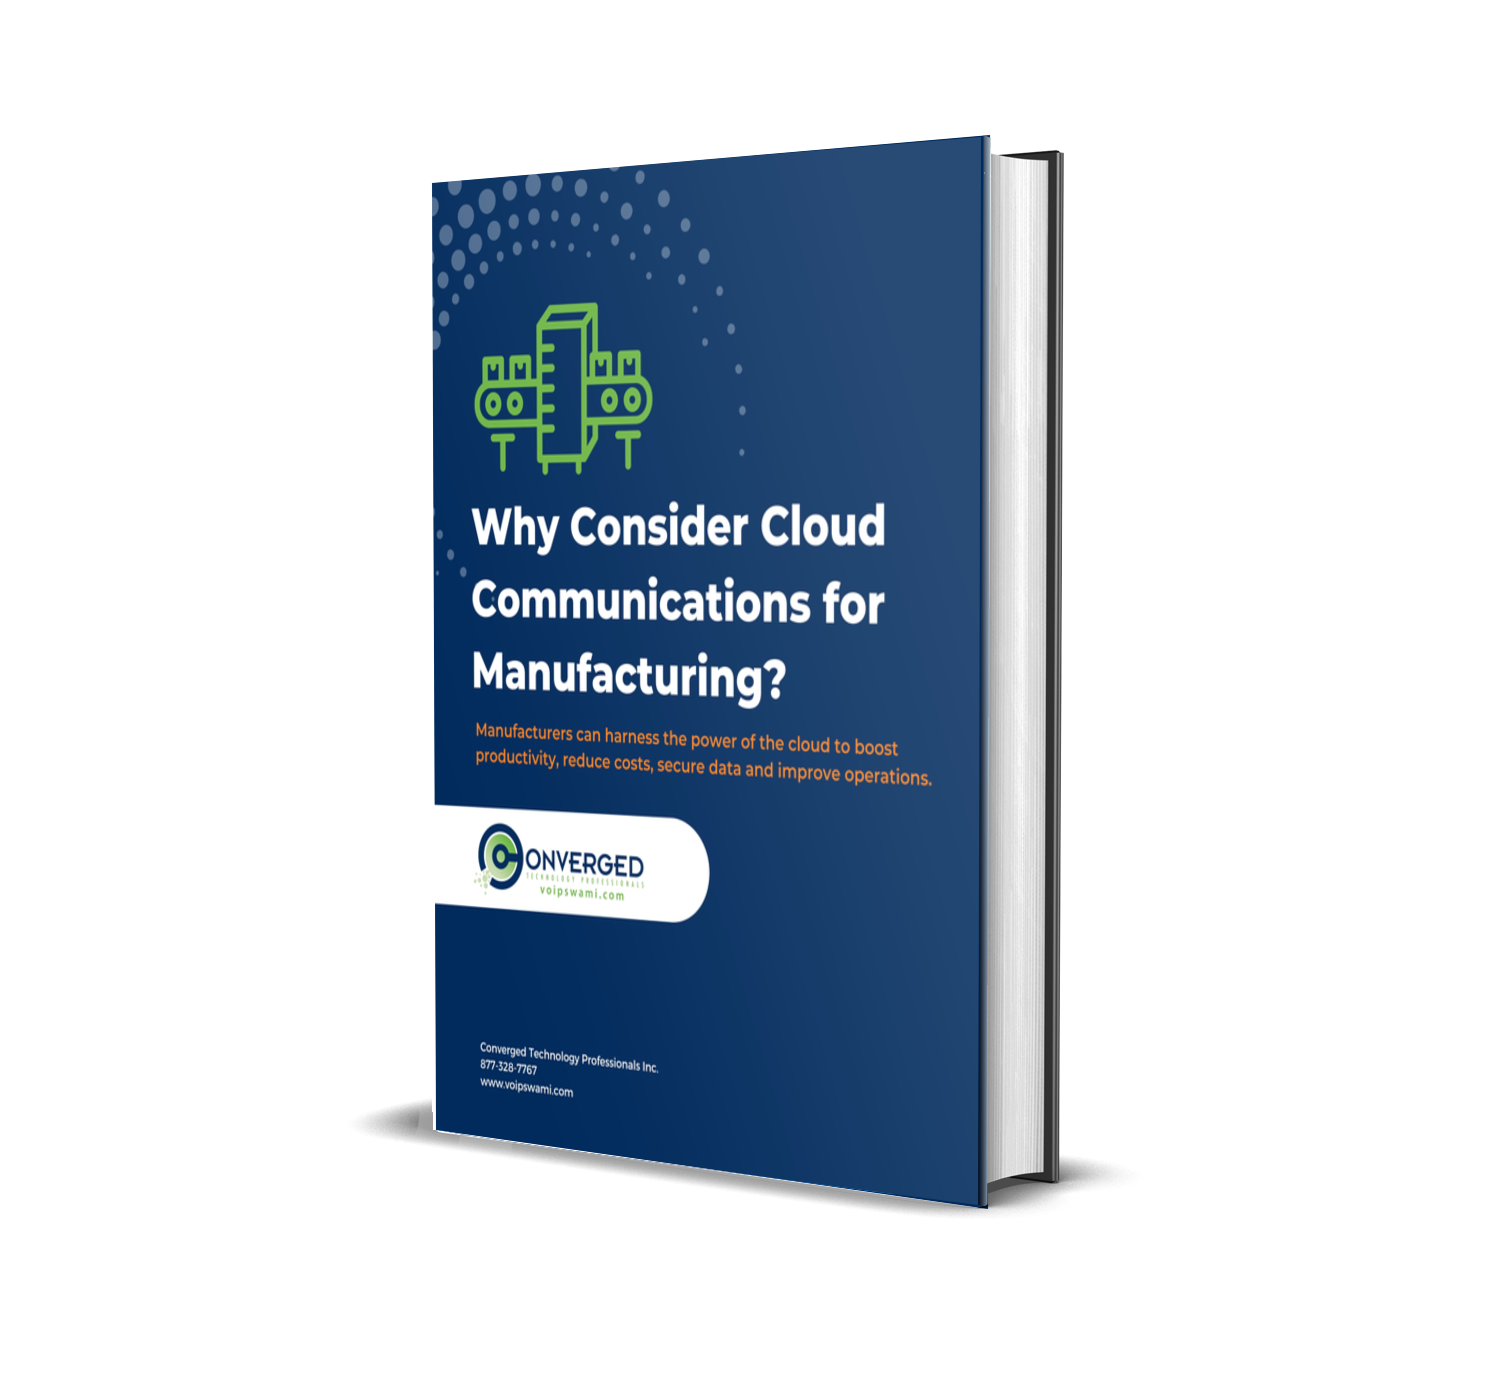 Info-book for Cloud and Manufacturing